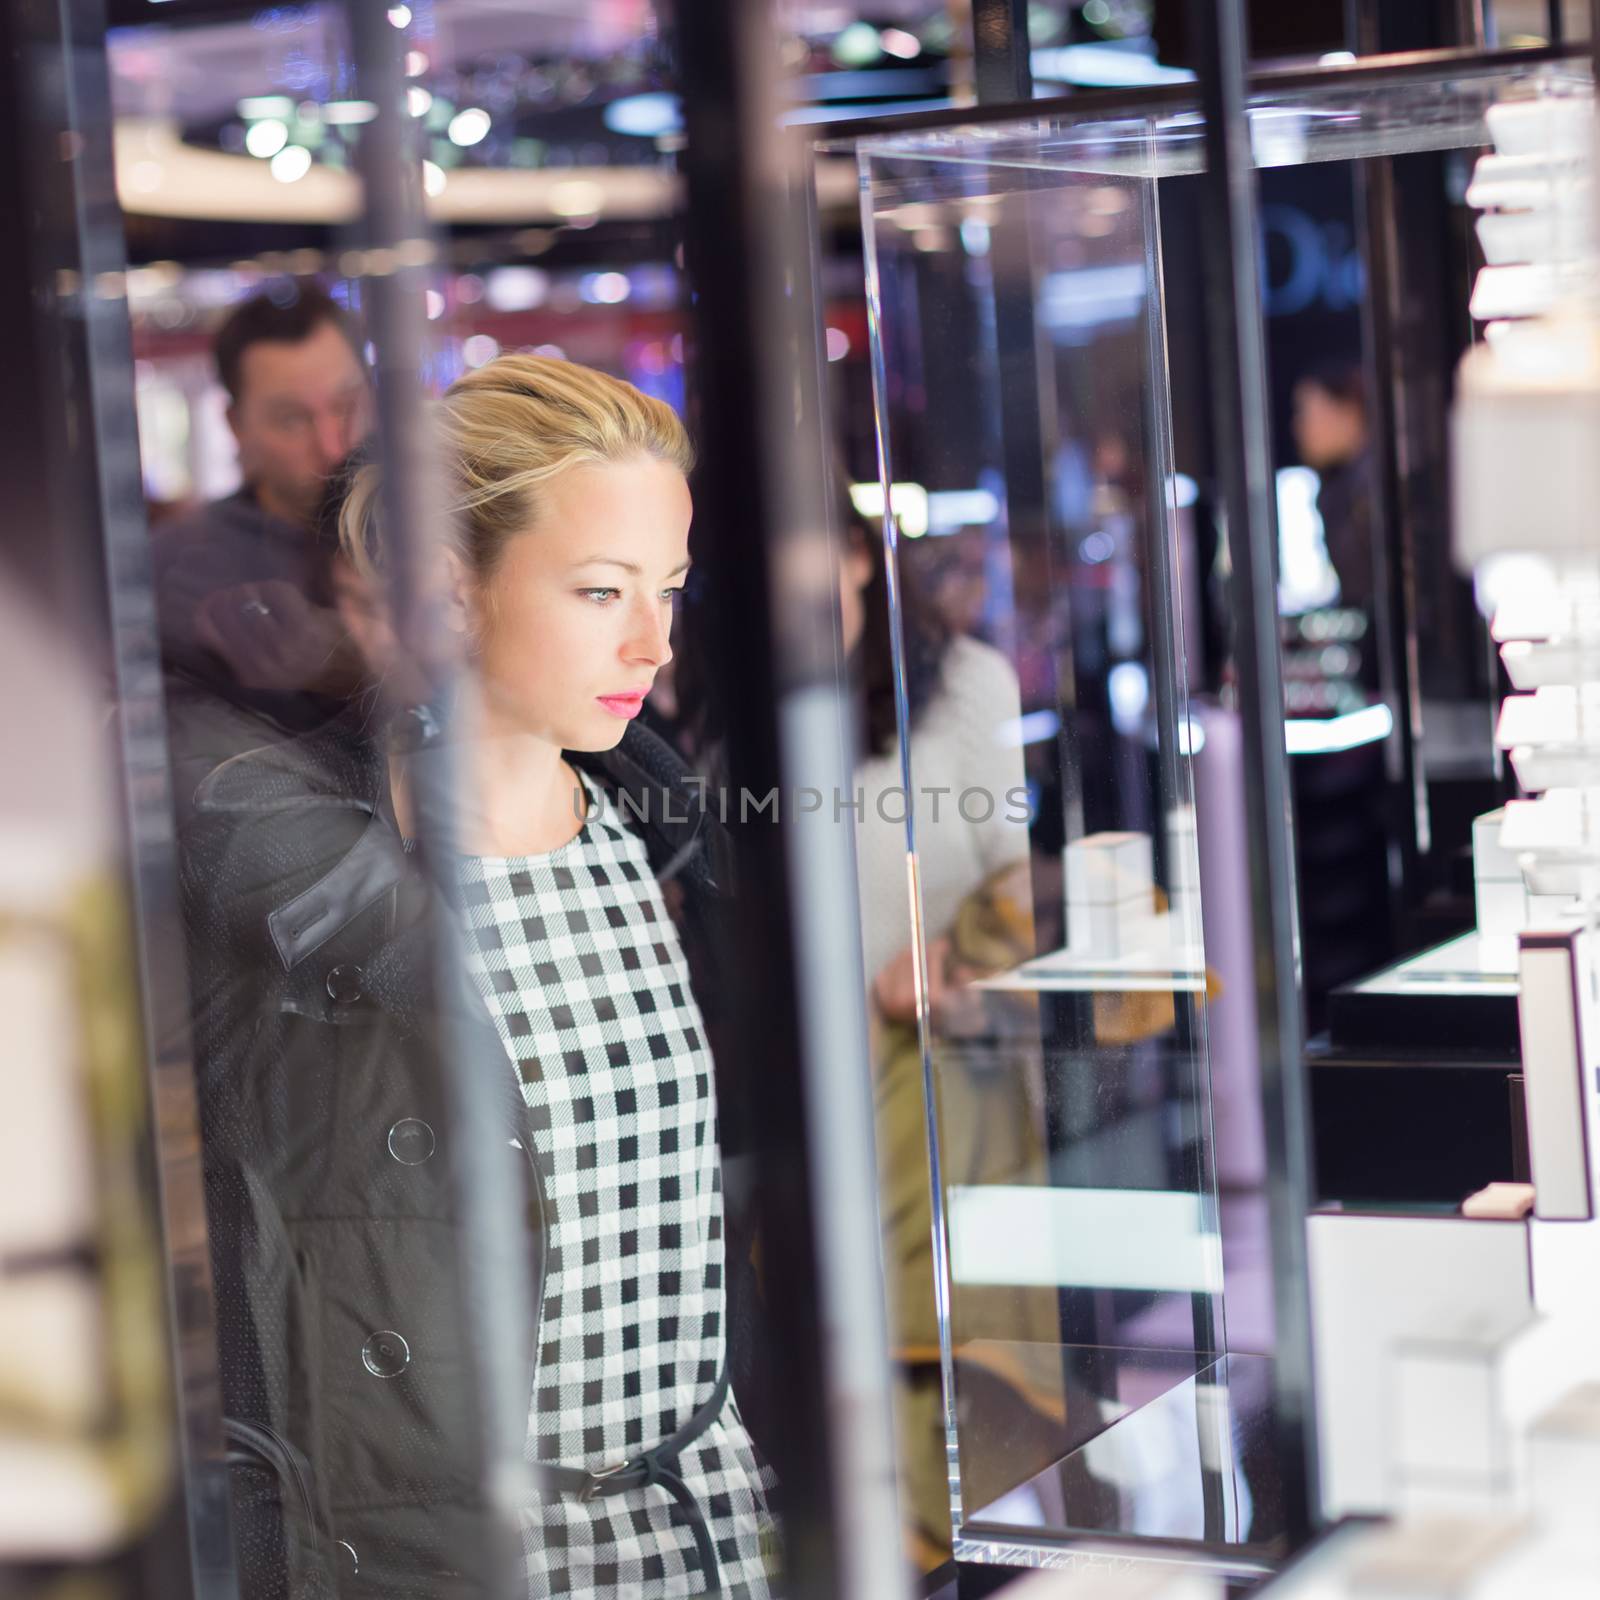 Beautiful blonde lady standing in front of showcase in beauty store, admiring new perfume collection.